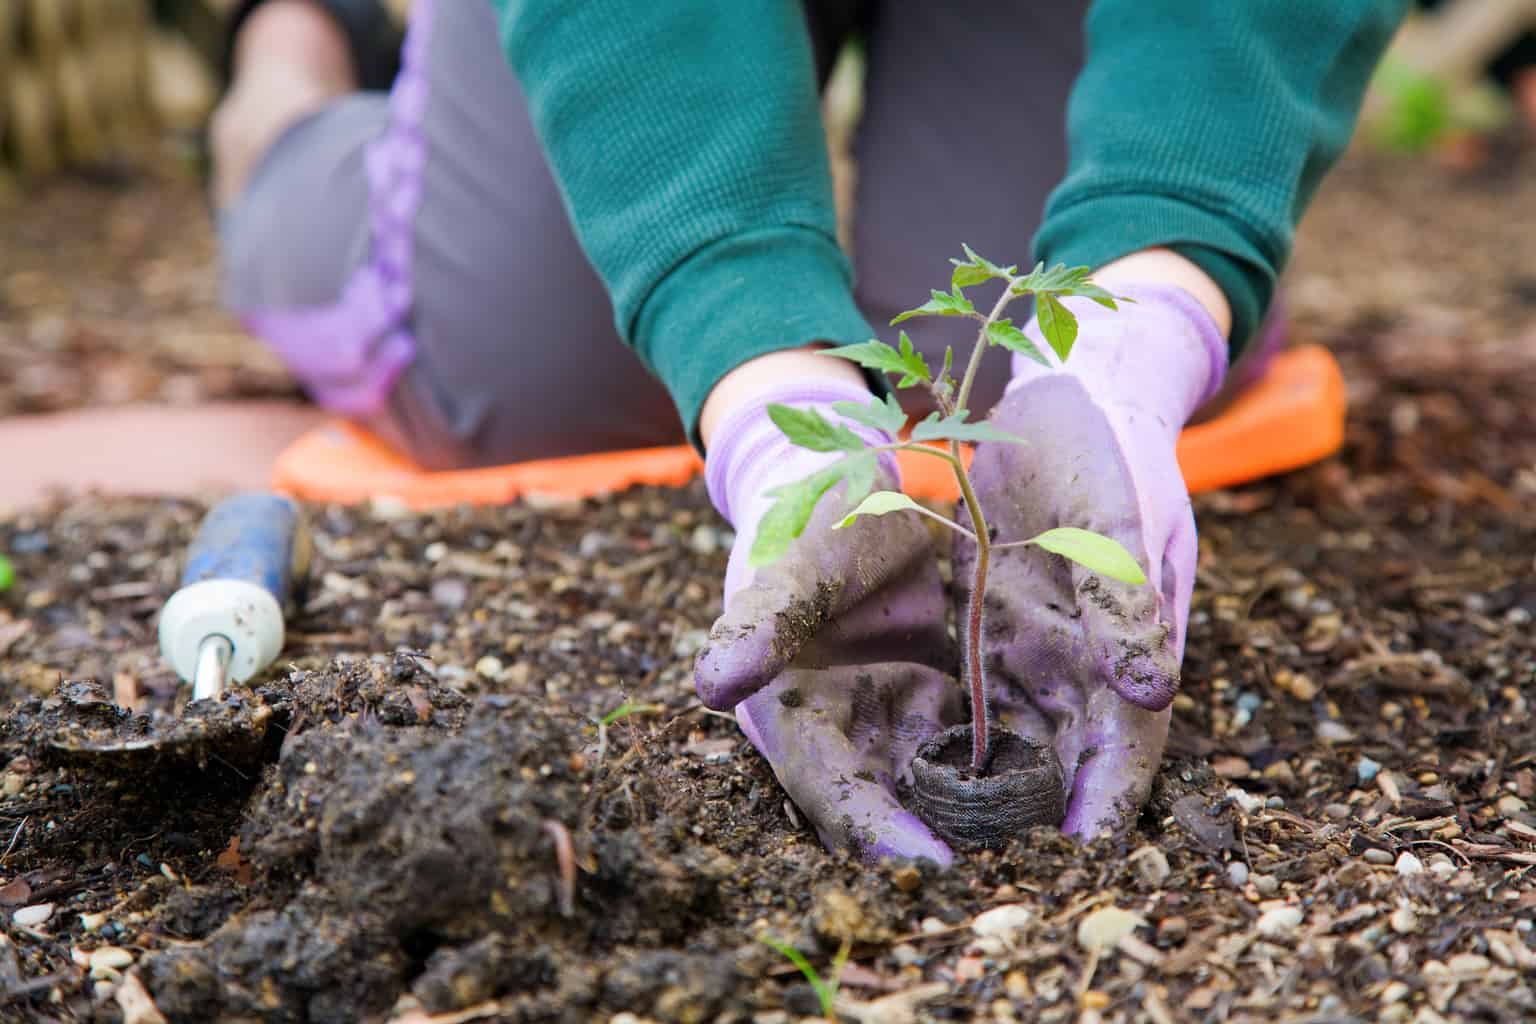 Closeup image of woman's hands in gardening gloves planting tomato